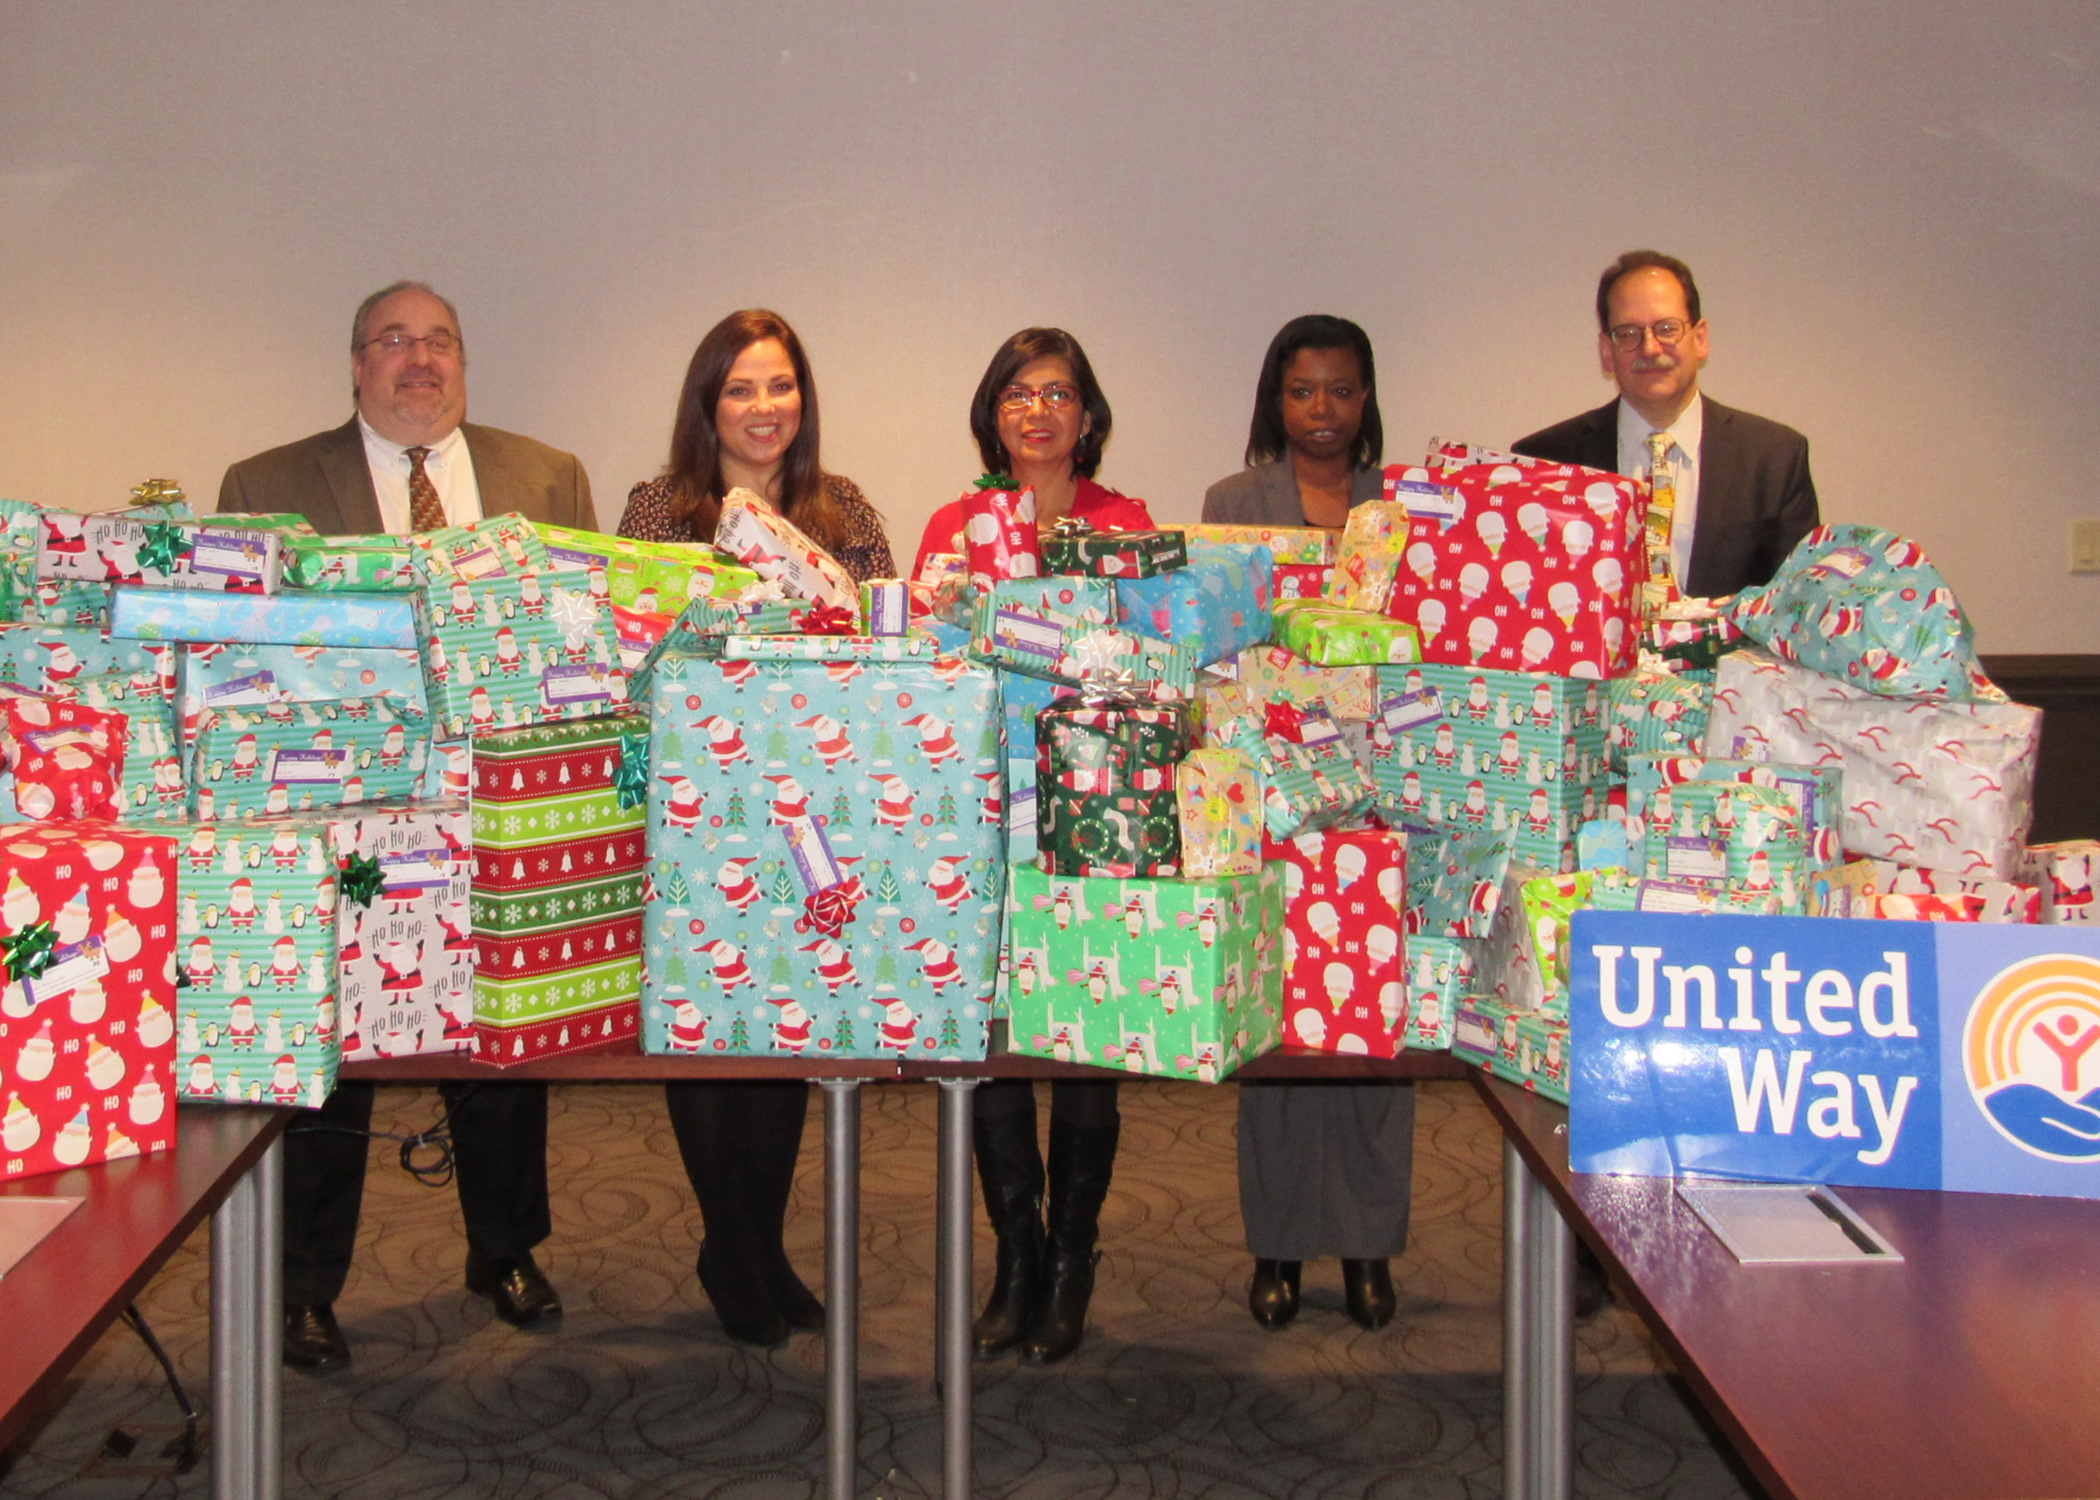 Lindabury Partners with United Way of Greater Union County for Holiday Gift-Giving